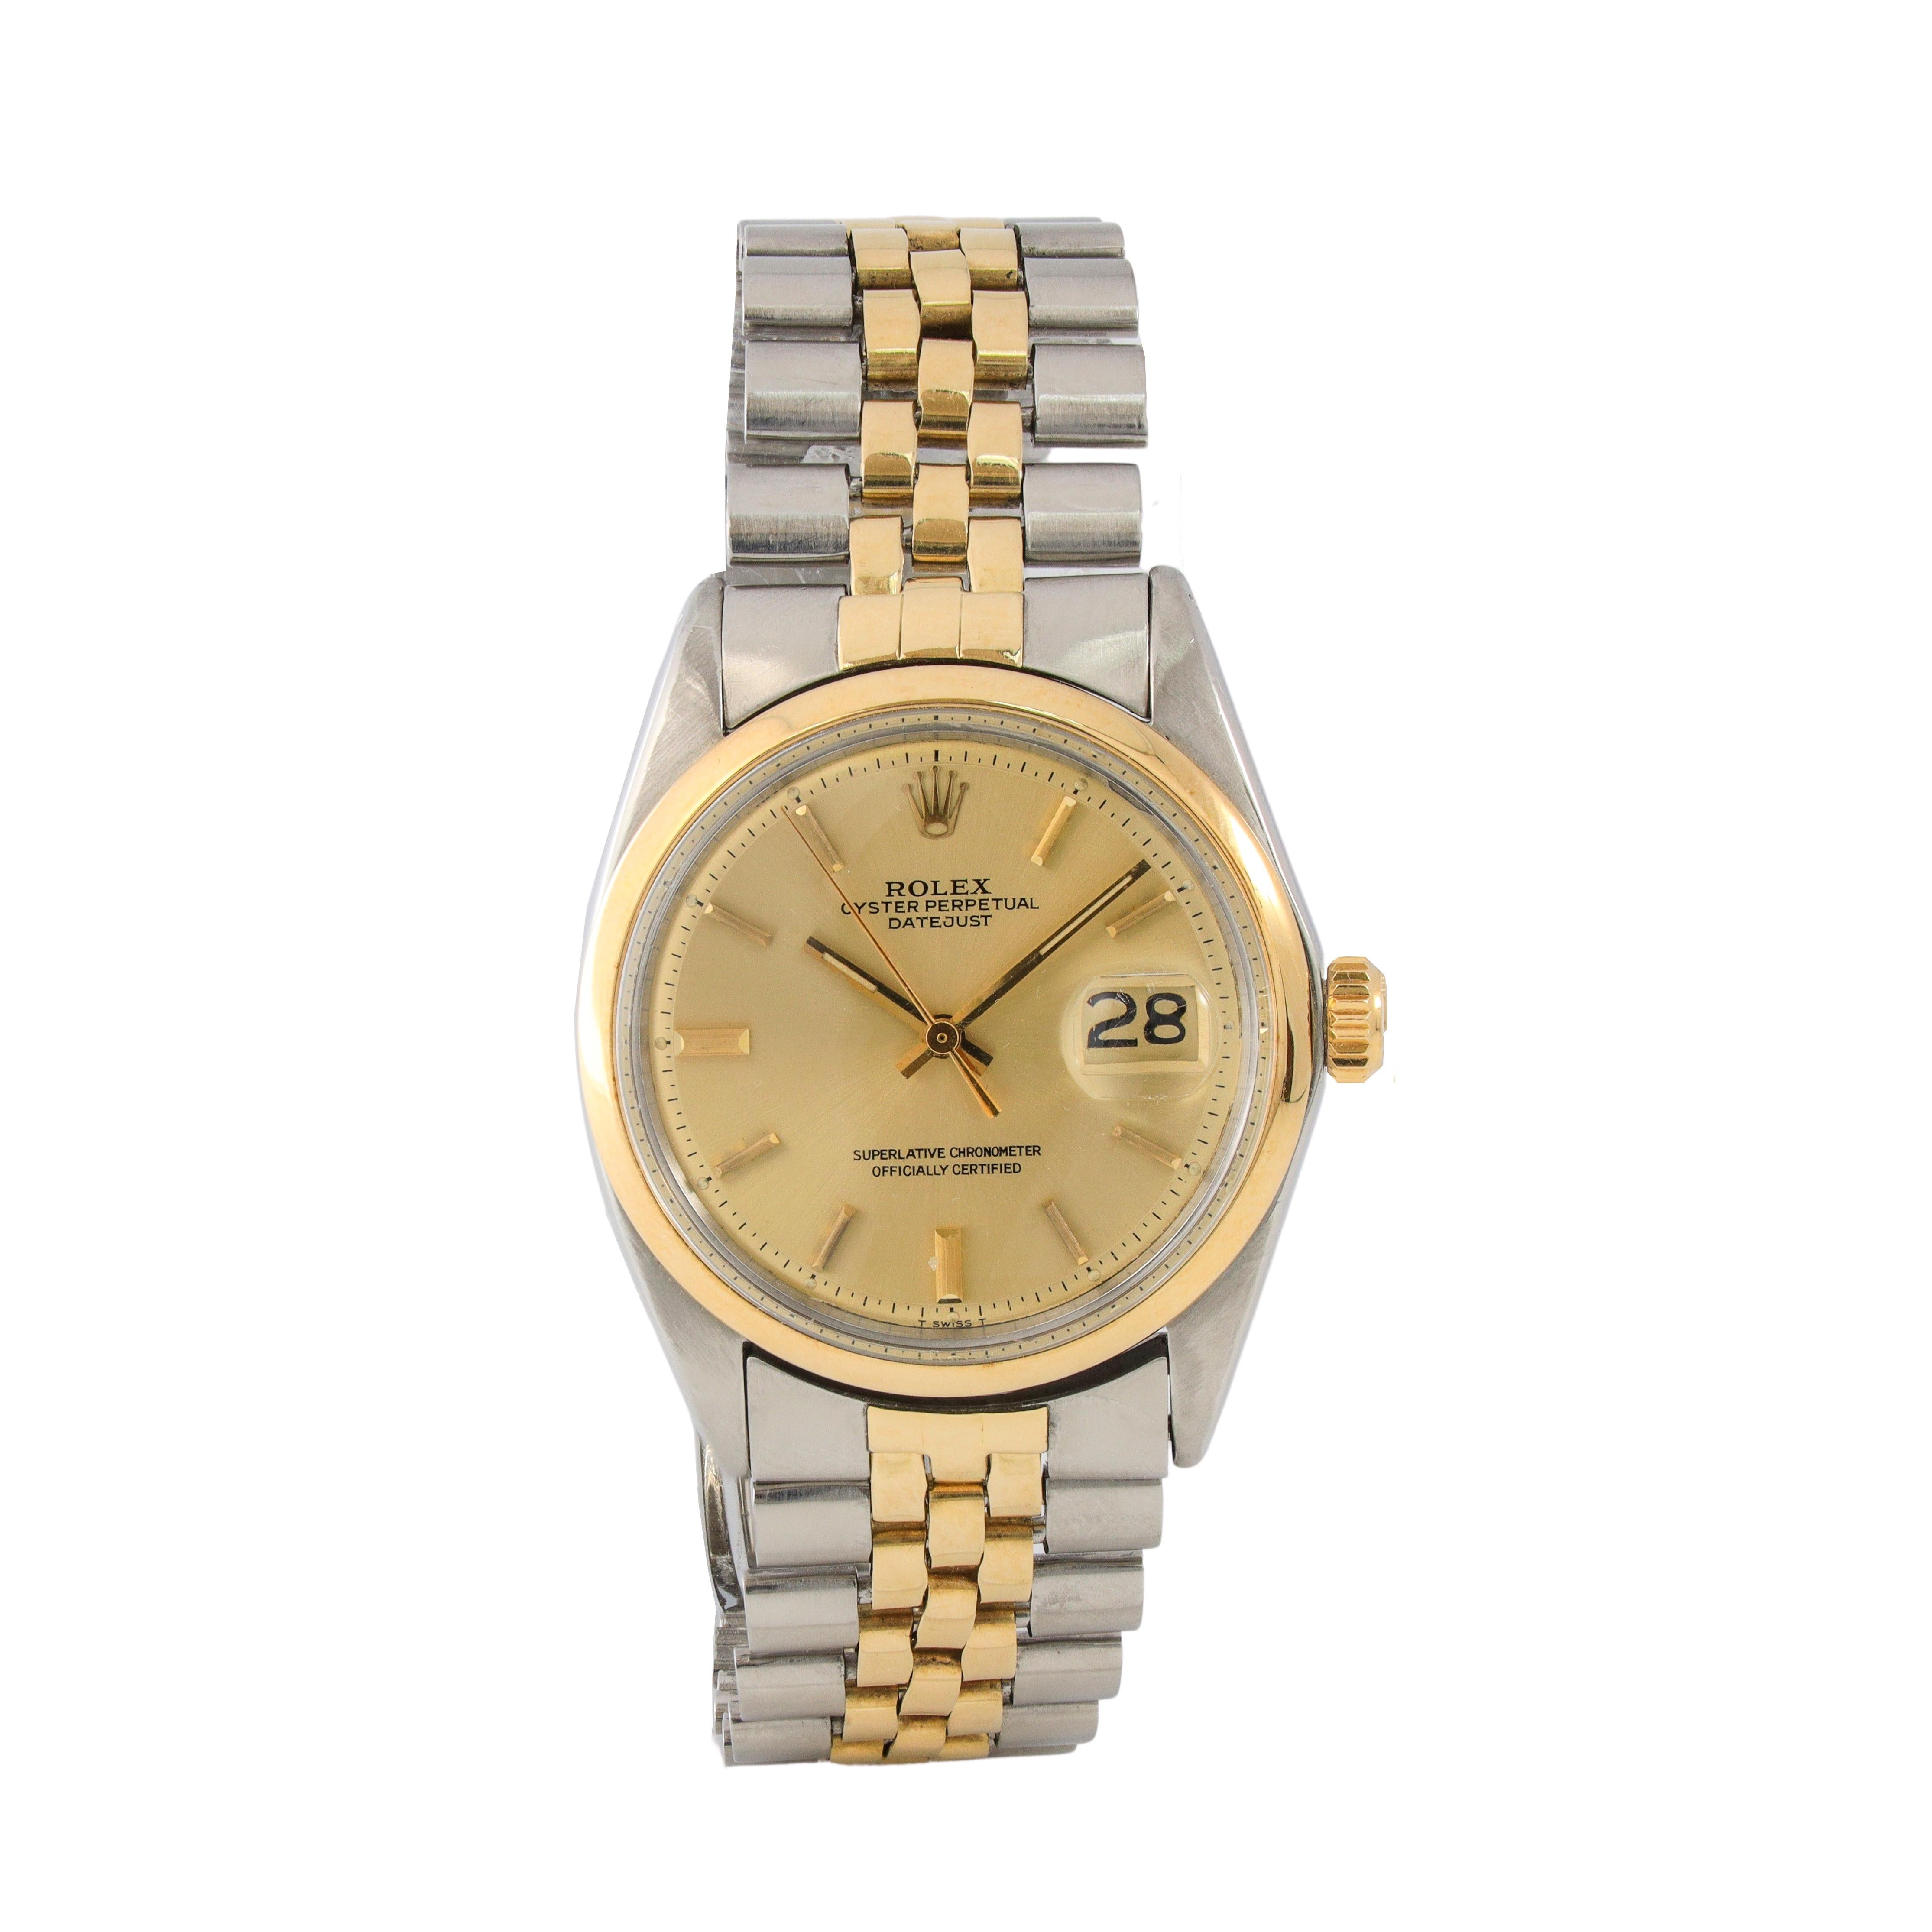 Rolex Datejust 18kt Yellow Gold/Stainless Steel Mens Watch For Sale 1